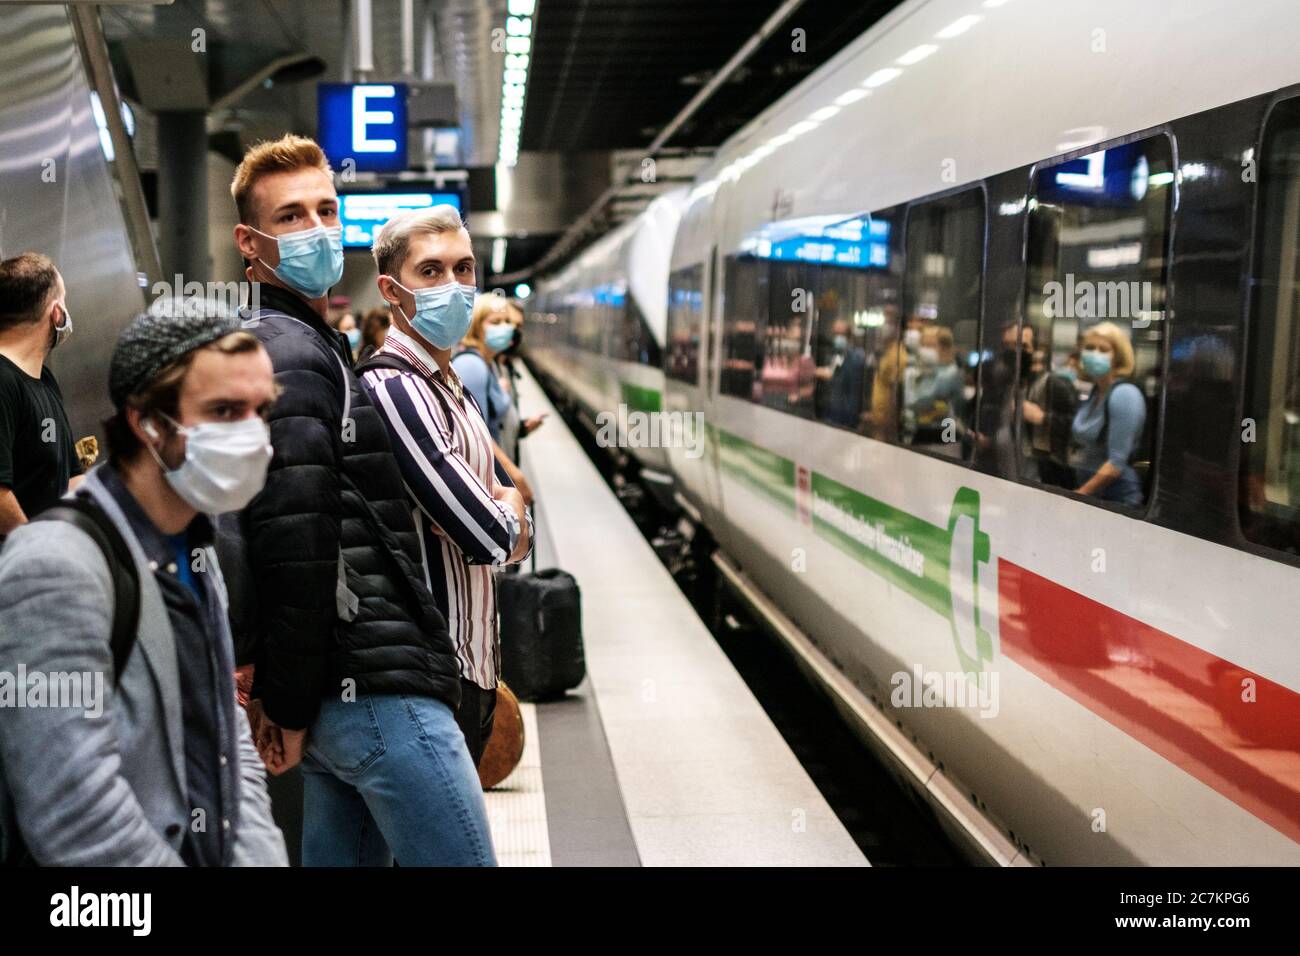 Berlin, Germany - July, 2020: People wearing mask waiting for ICE train on platform at station( Berlin Hauptbahnhof) Stock Photo